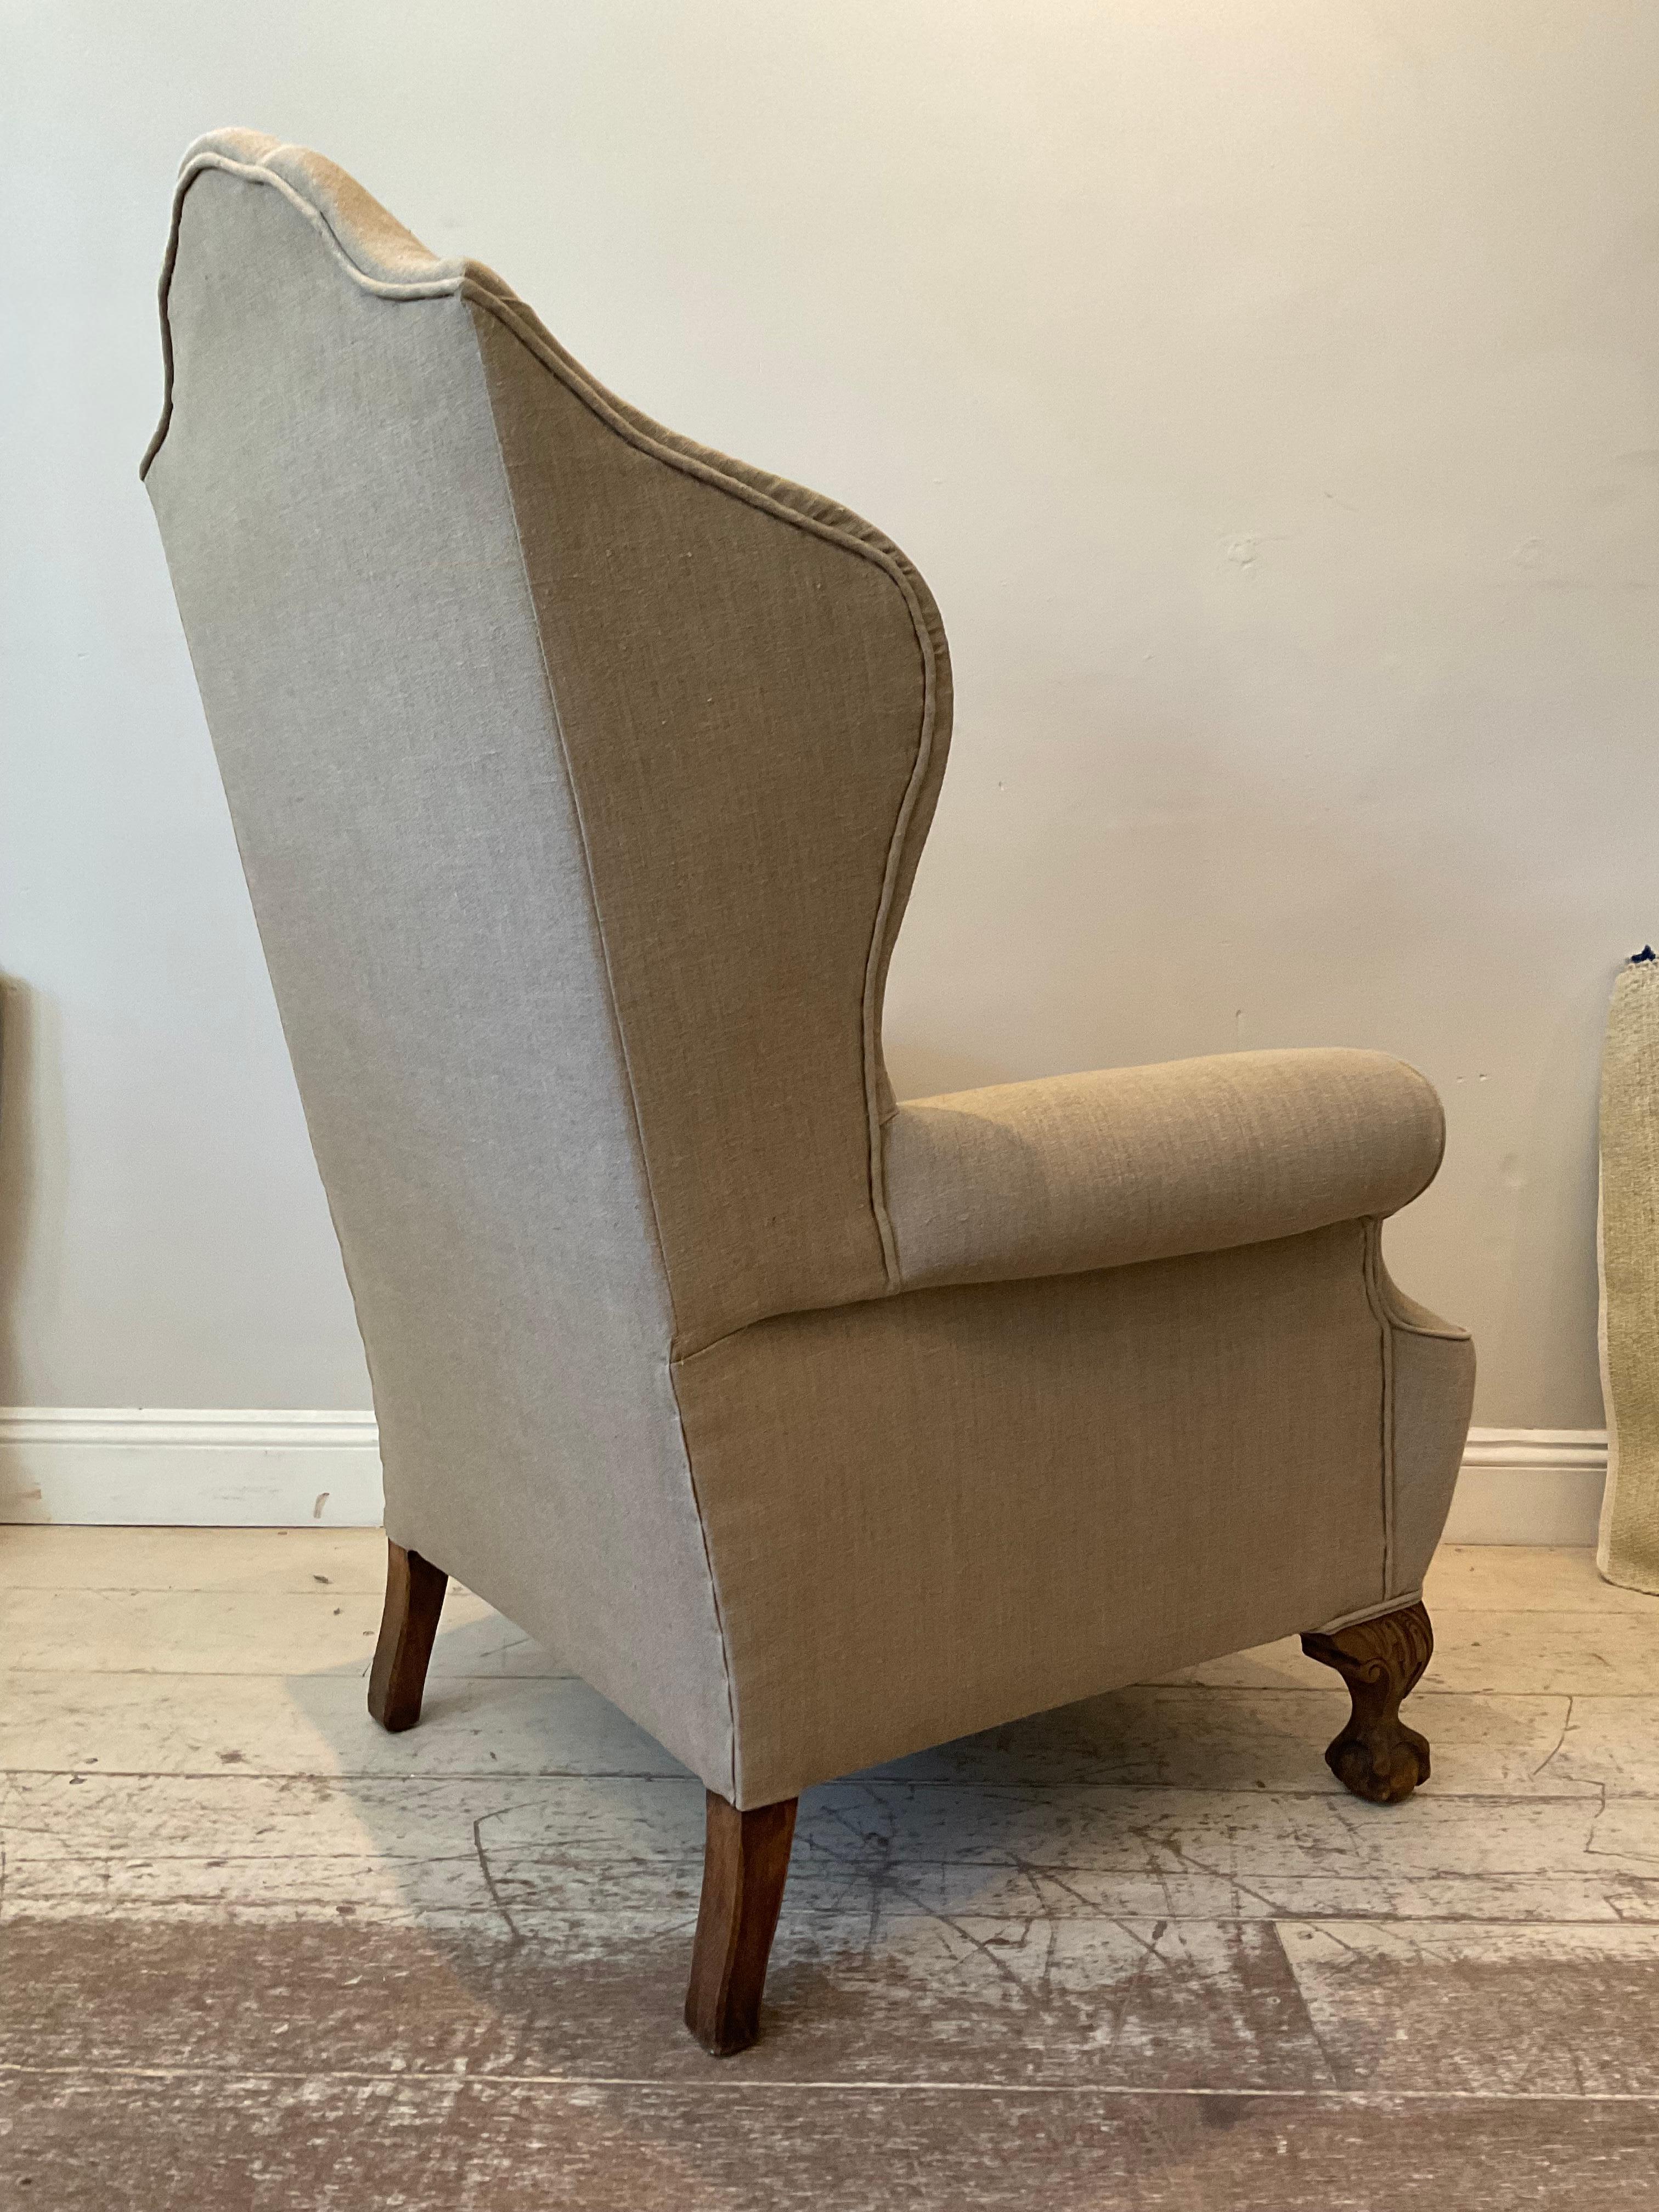 Pair of Large 1920s English Wing Back Chairs Upholstered in Neutral Linen 3